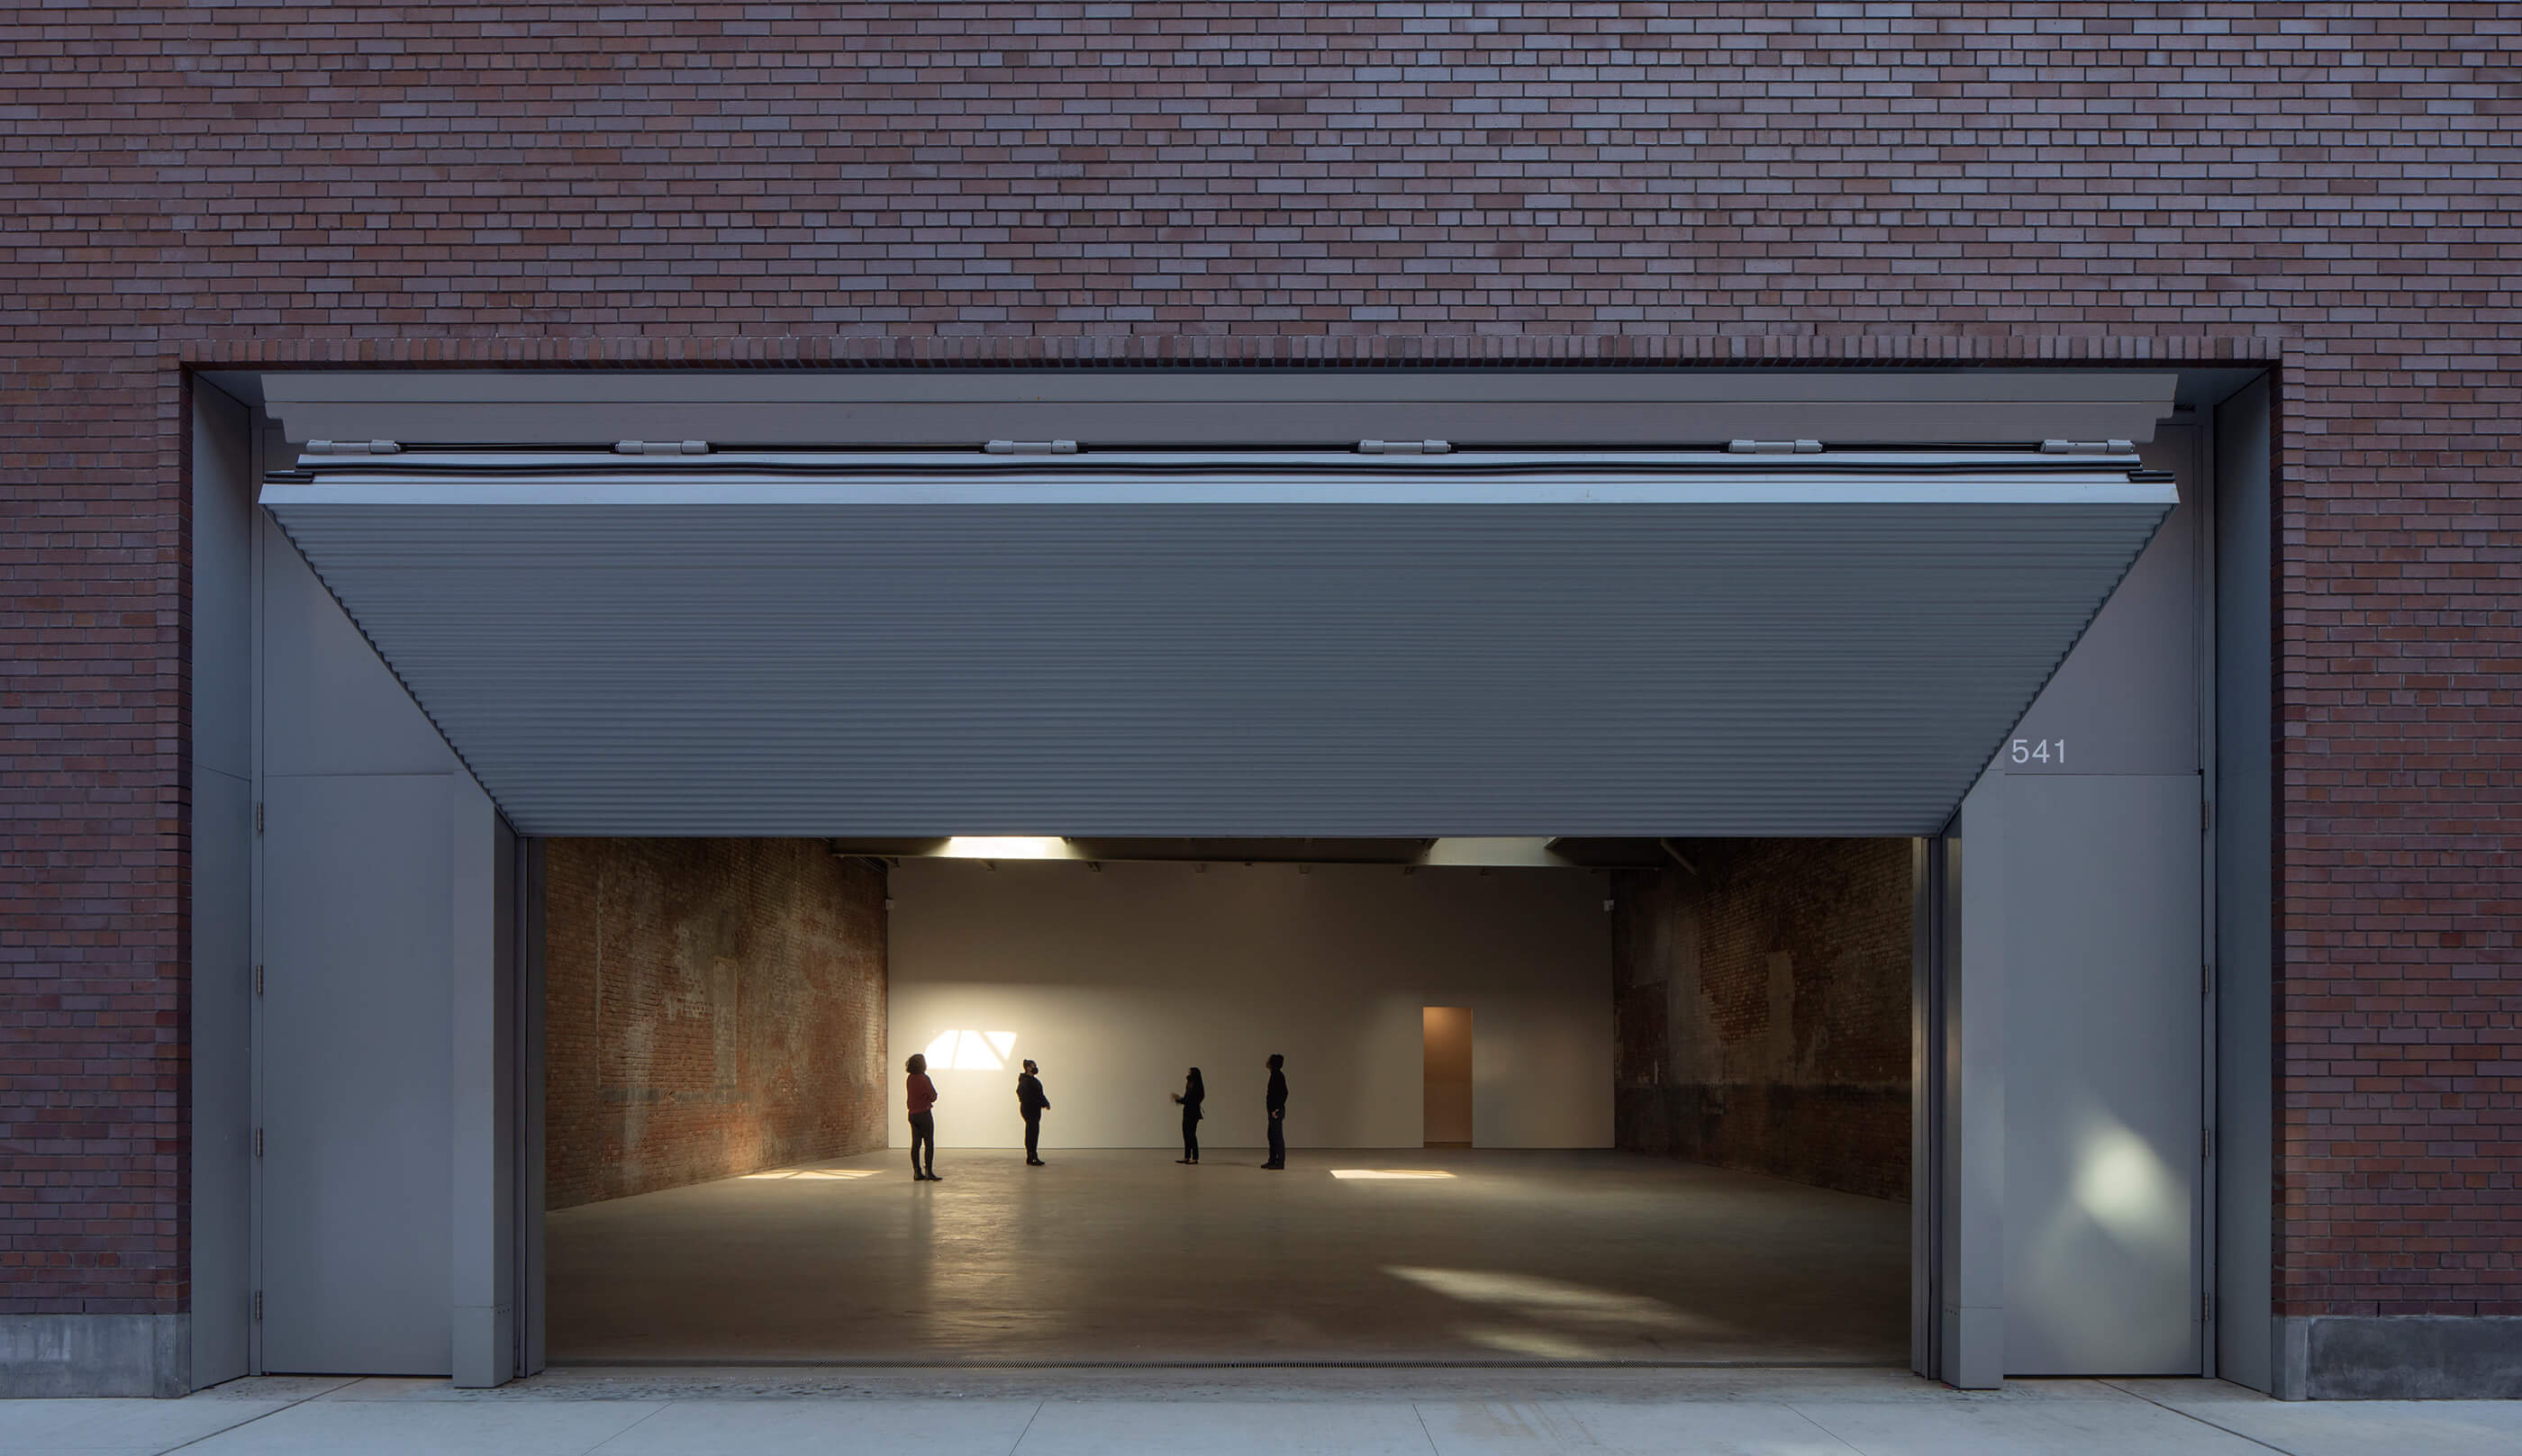 A sliding garage door leading into a gallery space